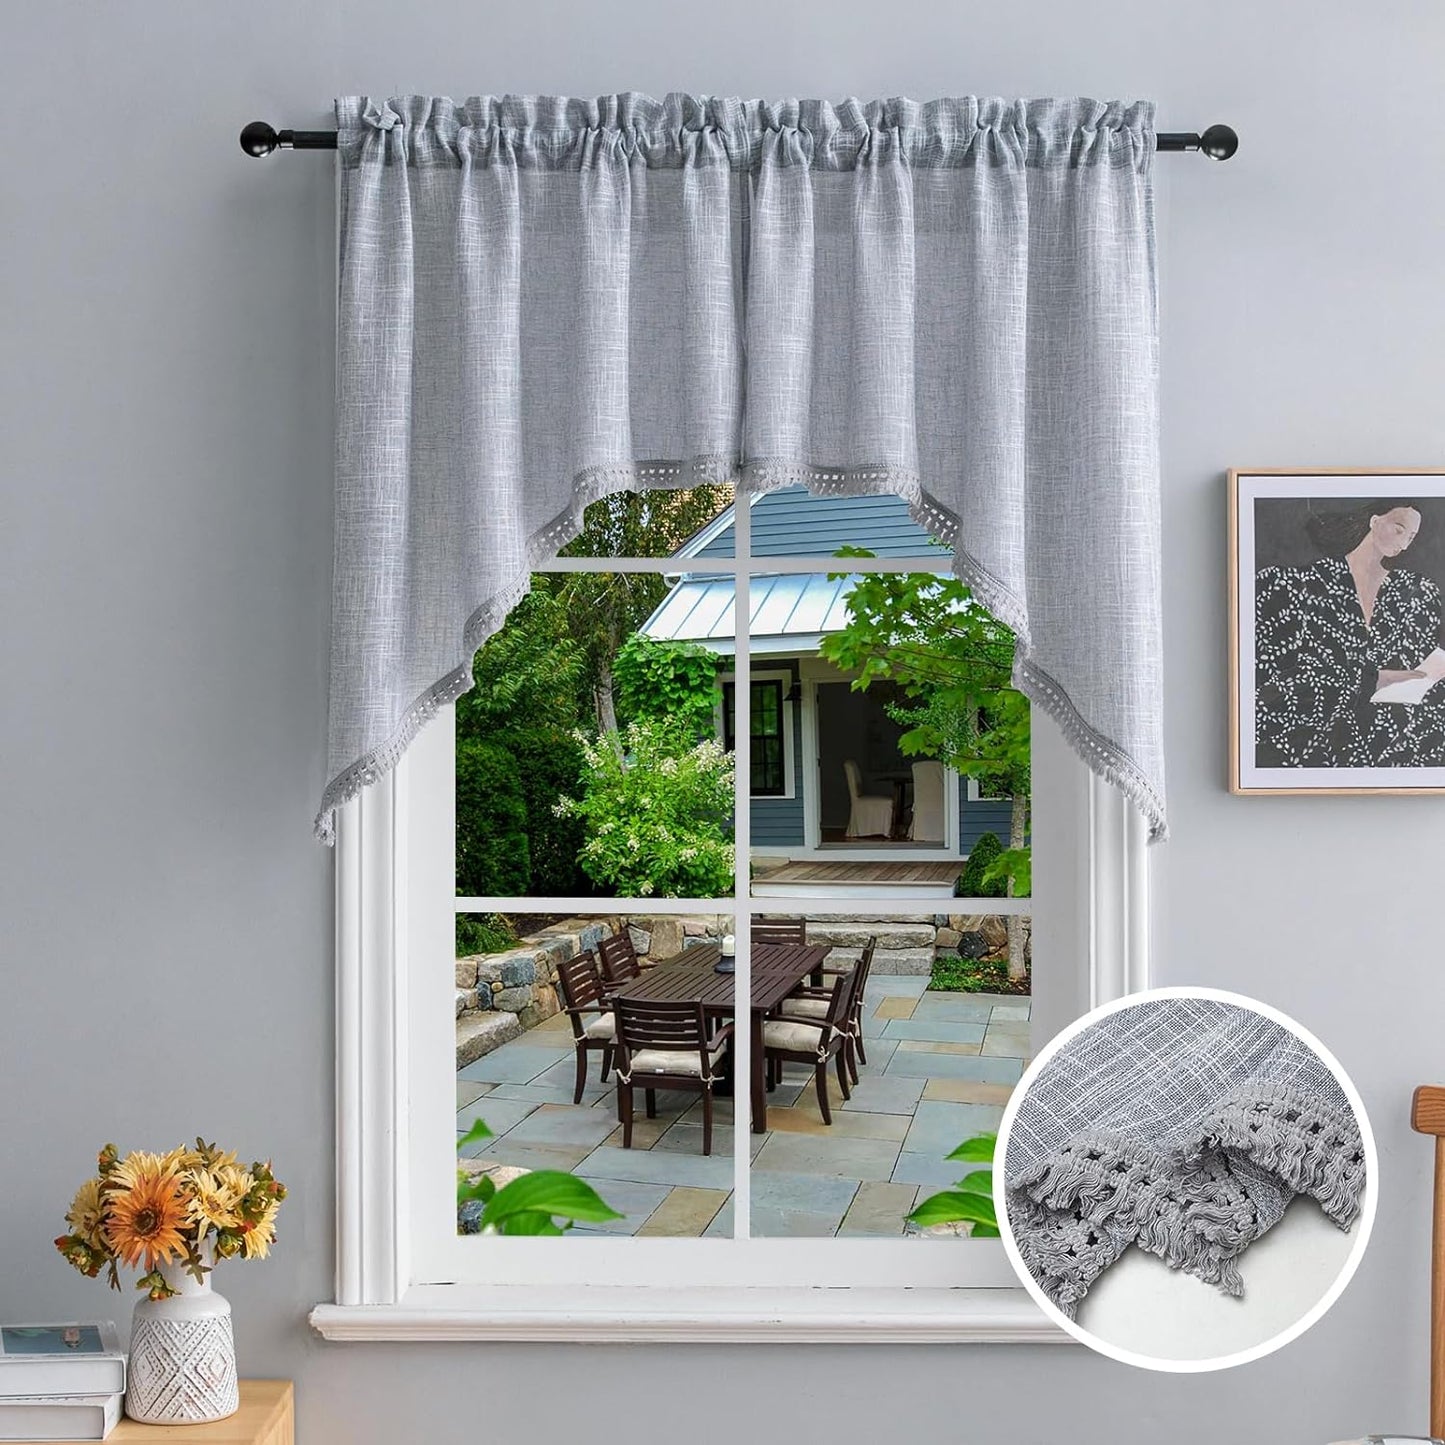 Beda Home Tassel Linen Textured Swag Curtain Valance for Farmhouses’ Kitchen; Light Filtering Rustic Short Swag Topper for Small Windows Bedroom Privacy Added Rod Pocket Design(Nature 36X63-2Pcs)  BD BEDA HOME Grey 36Wx36L - 2 Panels 